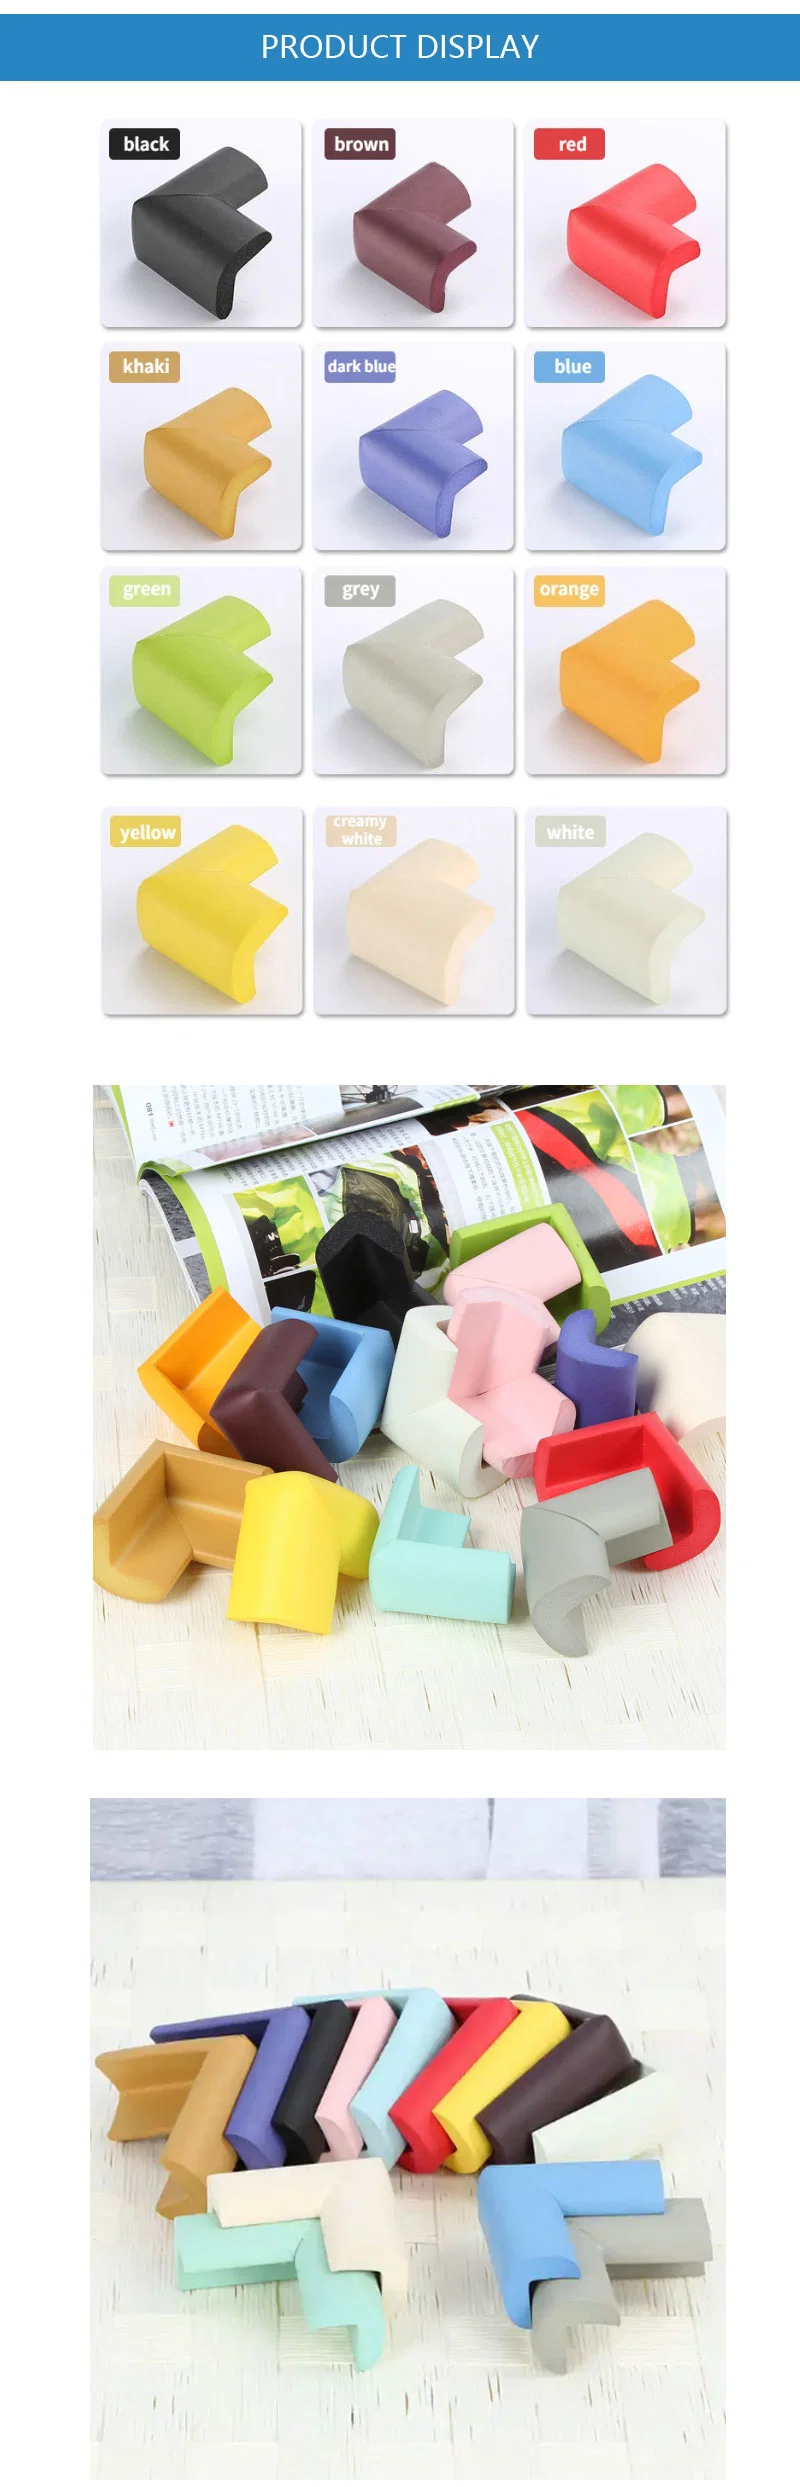 China Made Baby Safety Products Colorful Decorative Edge Corner Guards